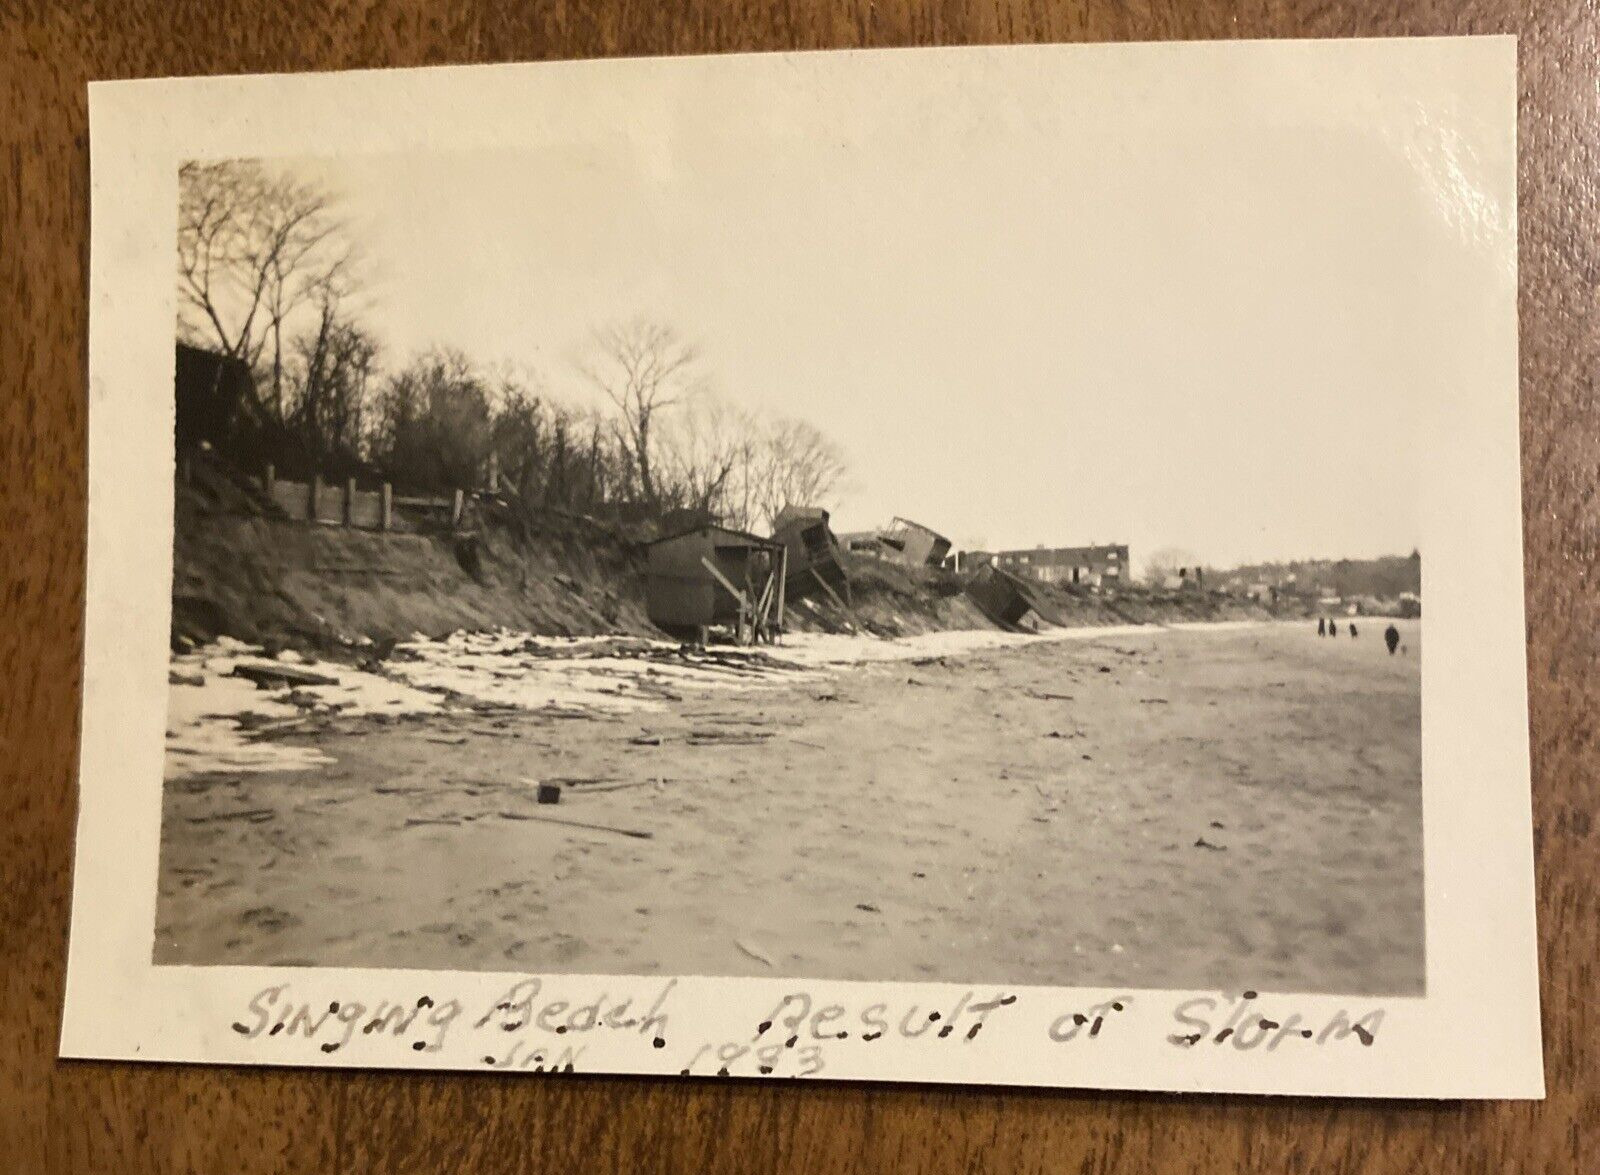 1933 Singing Beach Manchester-by-the-sea Massachusetts Storm Damage Photo P6i3